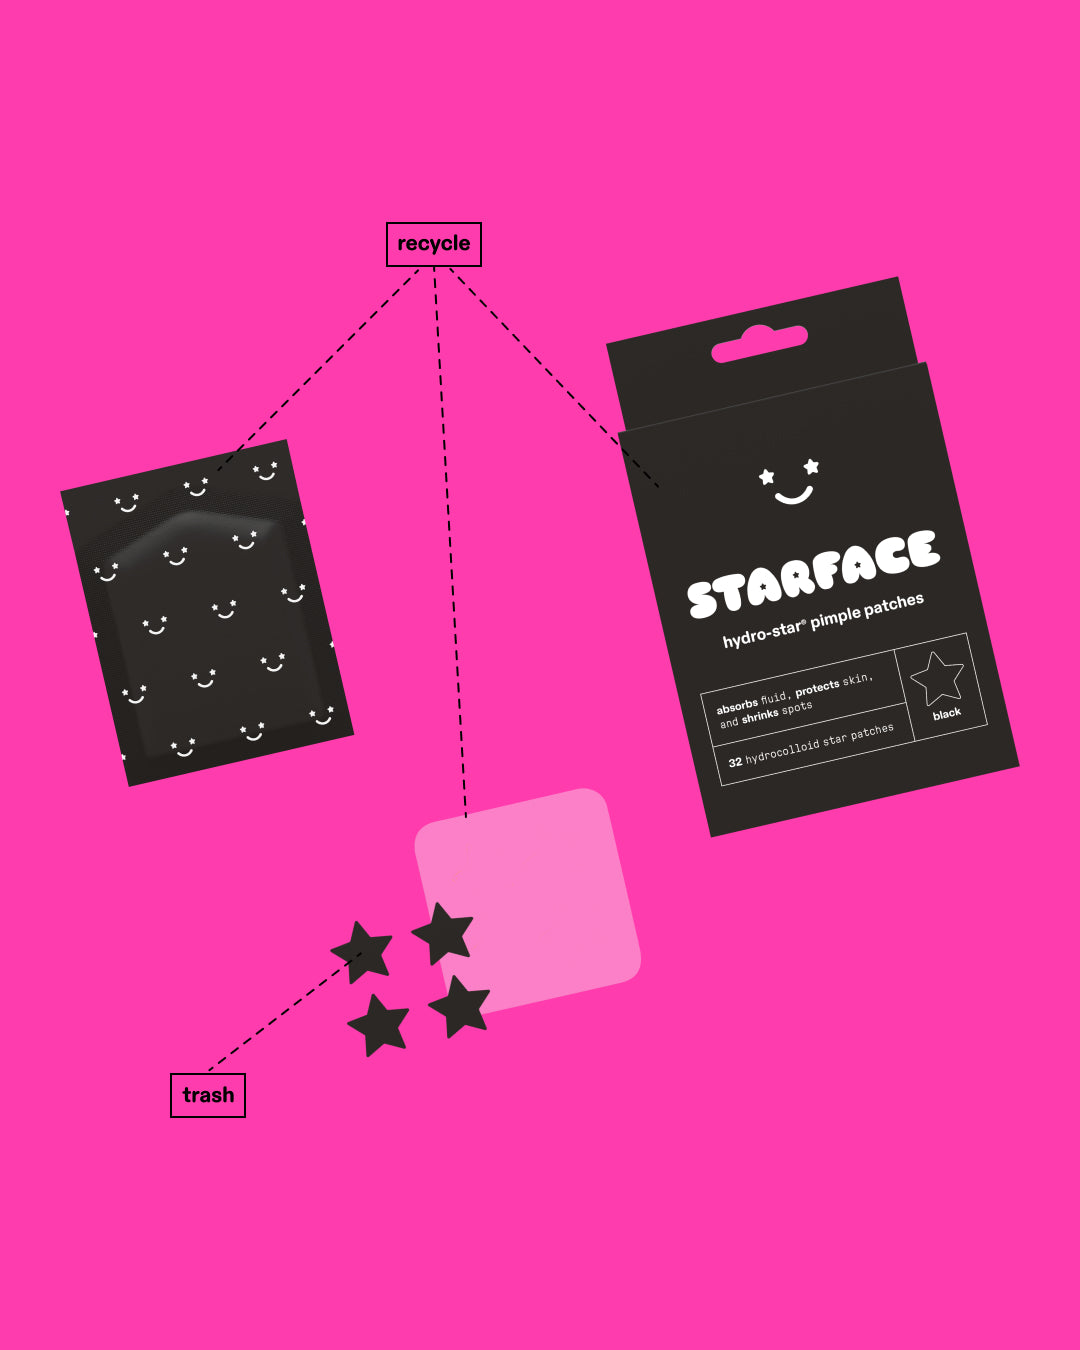 Black Star packaging on a pink background. Three lines mark the box, sleeve, and plastic sheets as recyclable. Another line marks used pimple patches as trash. 